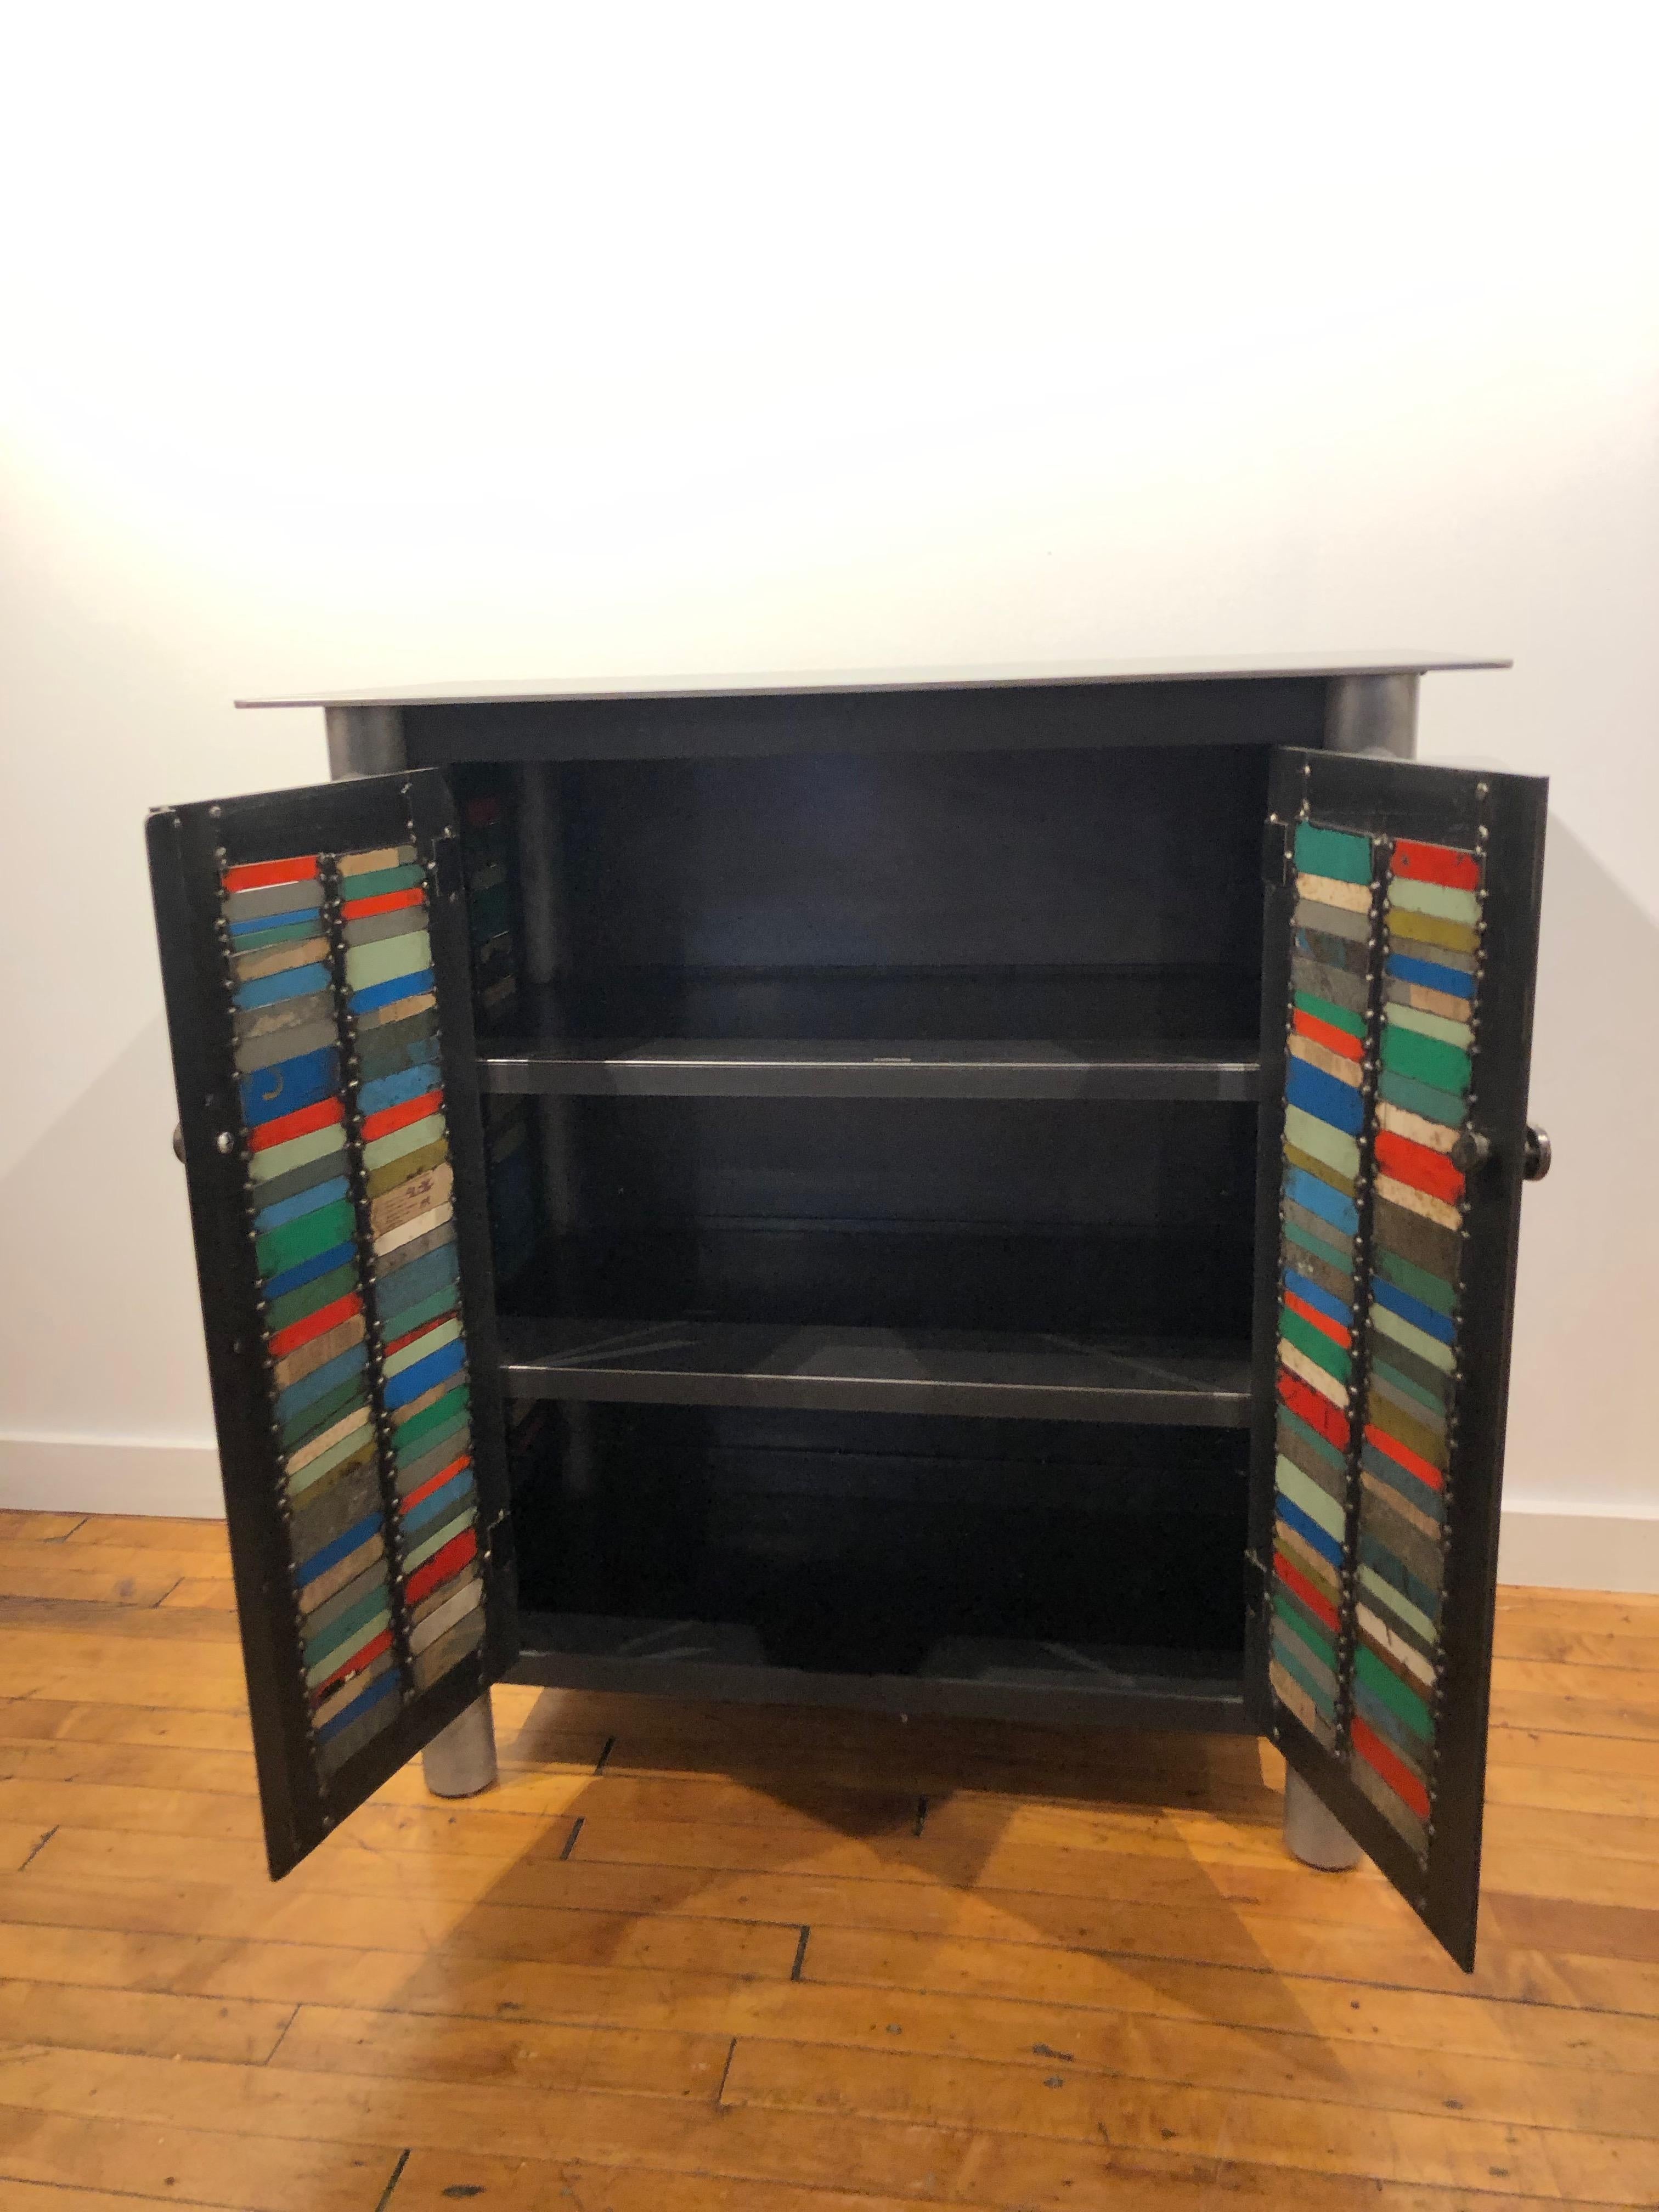 This is a totally functional two door cupboard. It is created from hot-rolled steel and found steel. The legs are made from salvaged pipe. The panels on the door fronts and sides are made from salvaged pieces of steel with the original paint and